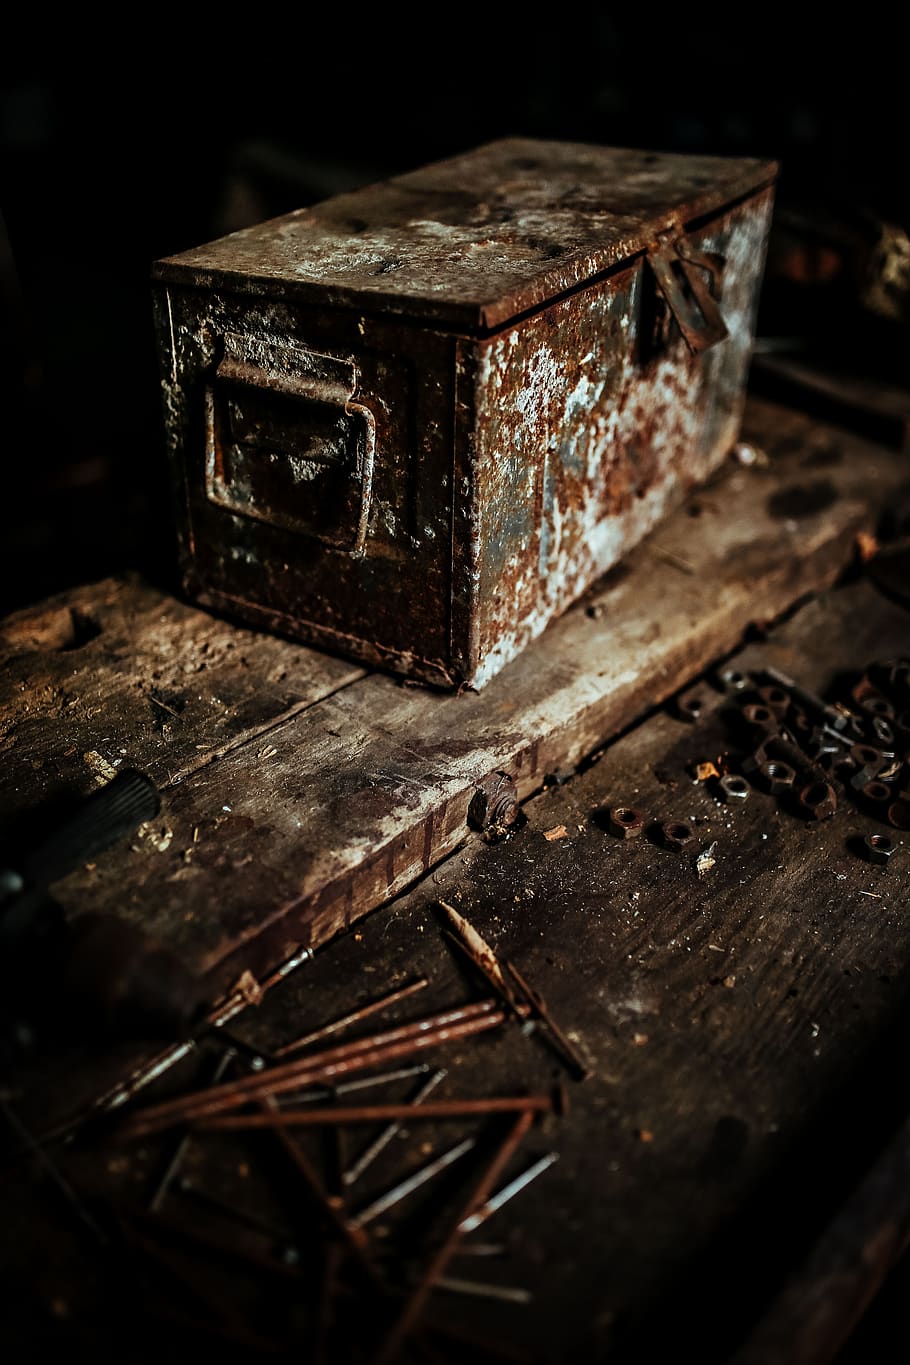 nails, box, wooden, metal, workshop, garage, rusty, dust, bolts, Old